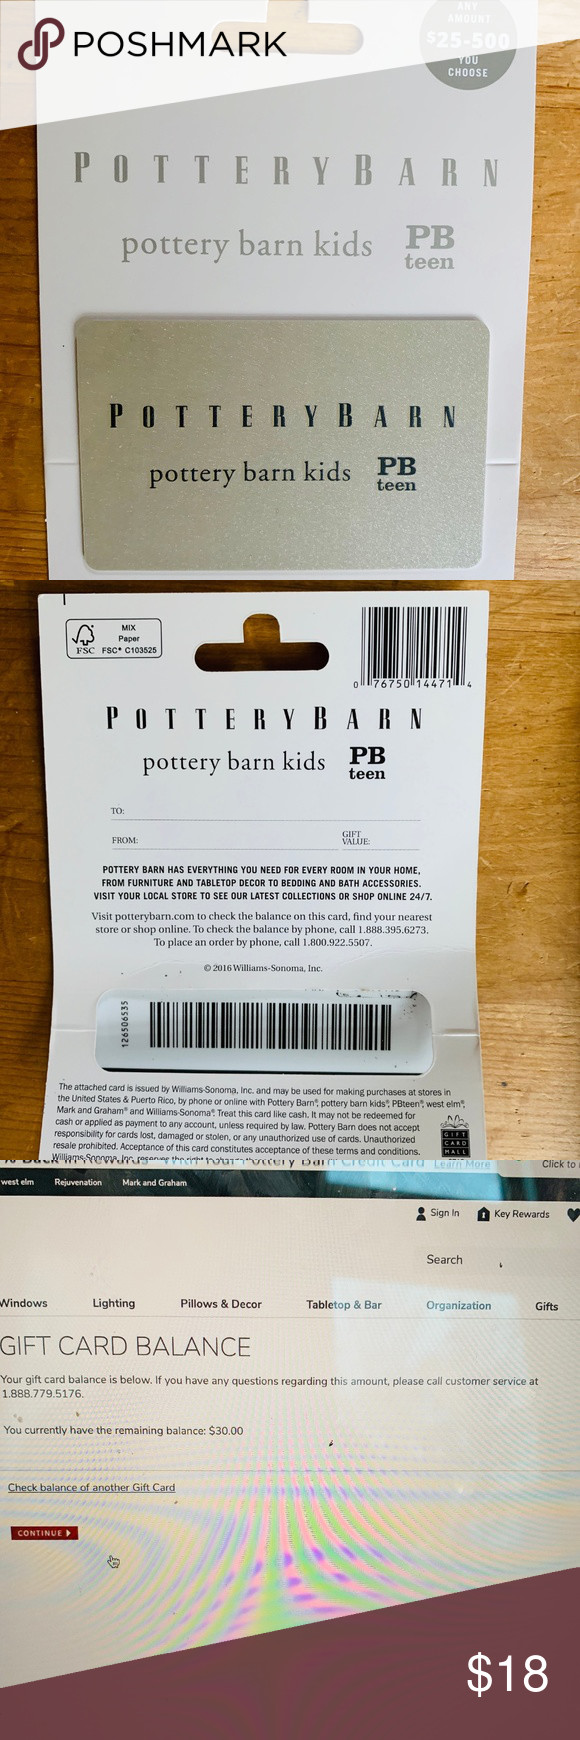 Pottery Barn Kids Gift Card Balance
 Pottery barn kids t card $30 With images